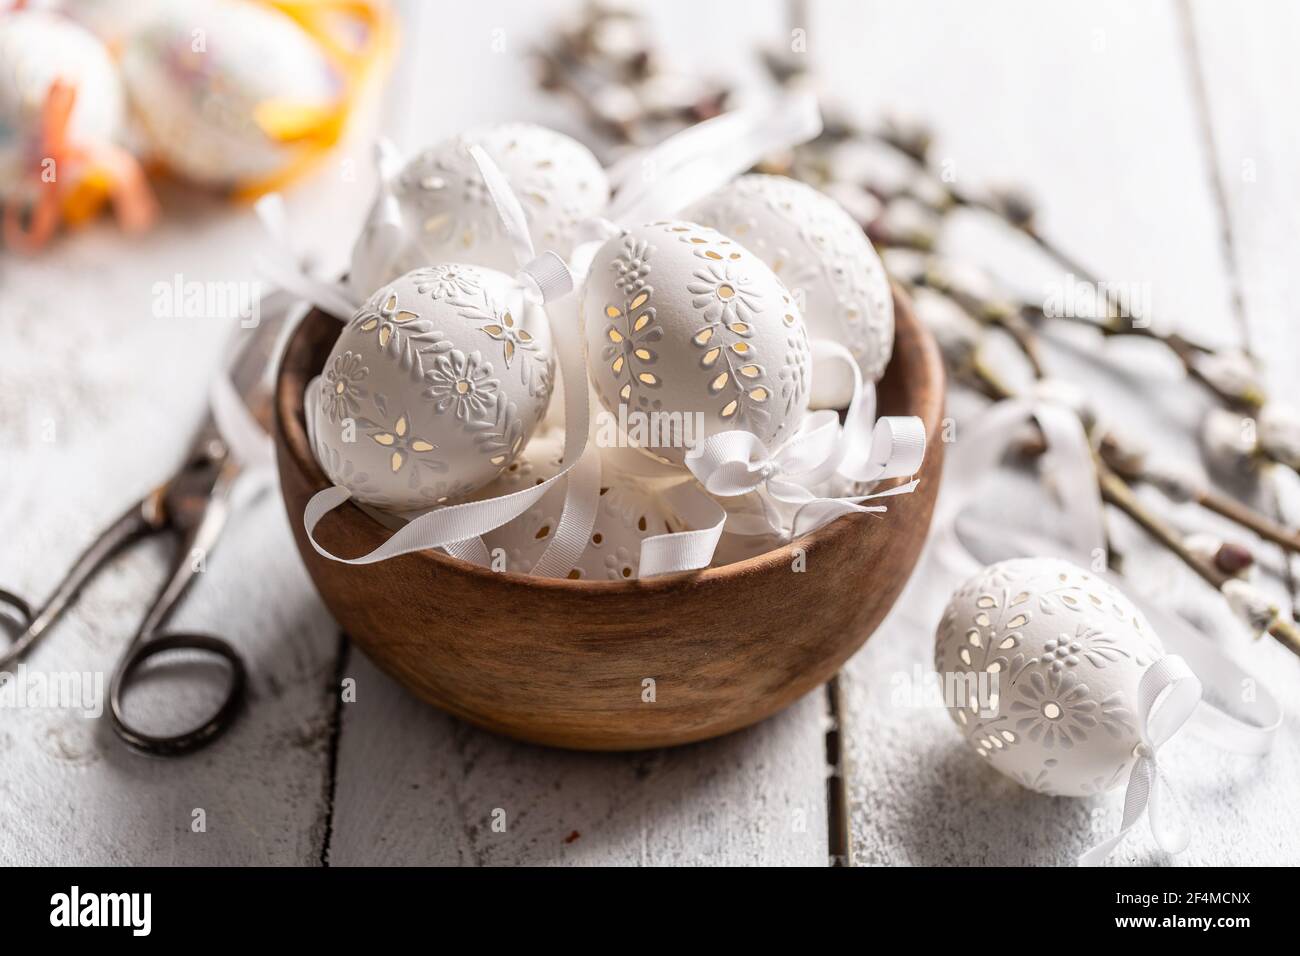 Handmade white easter eggs with willow catkins in a wooden bowl on wooden table. Stock Photo